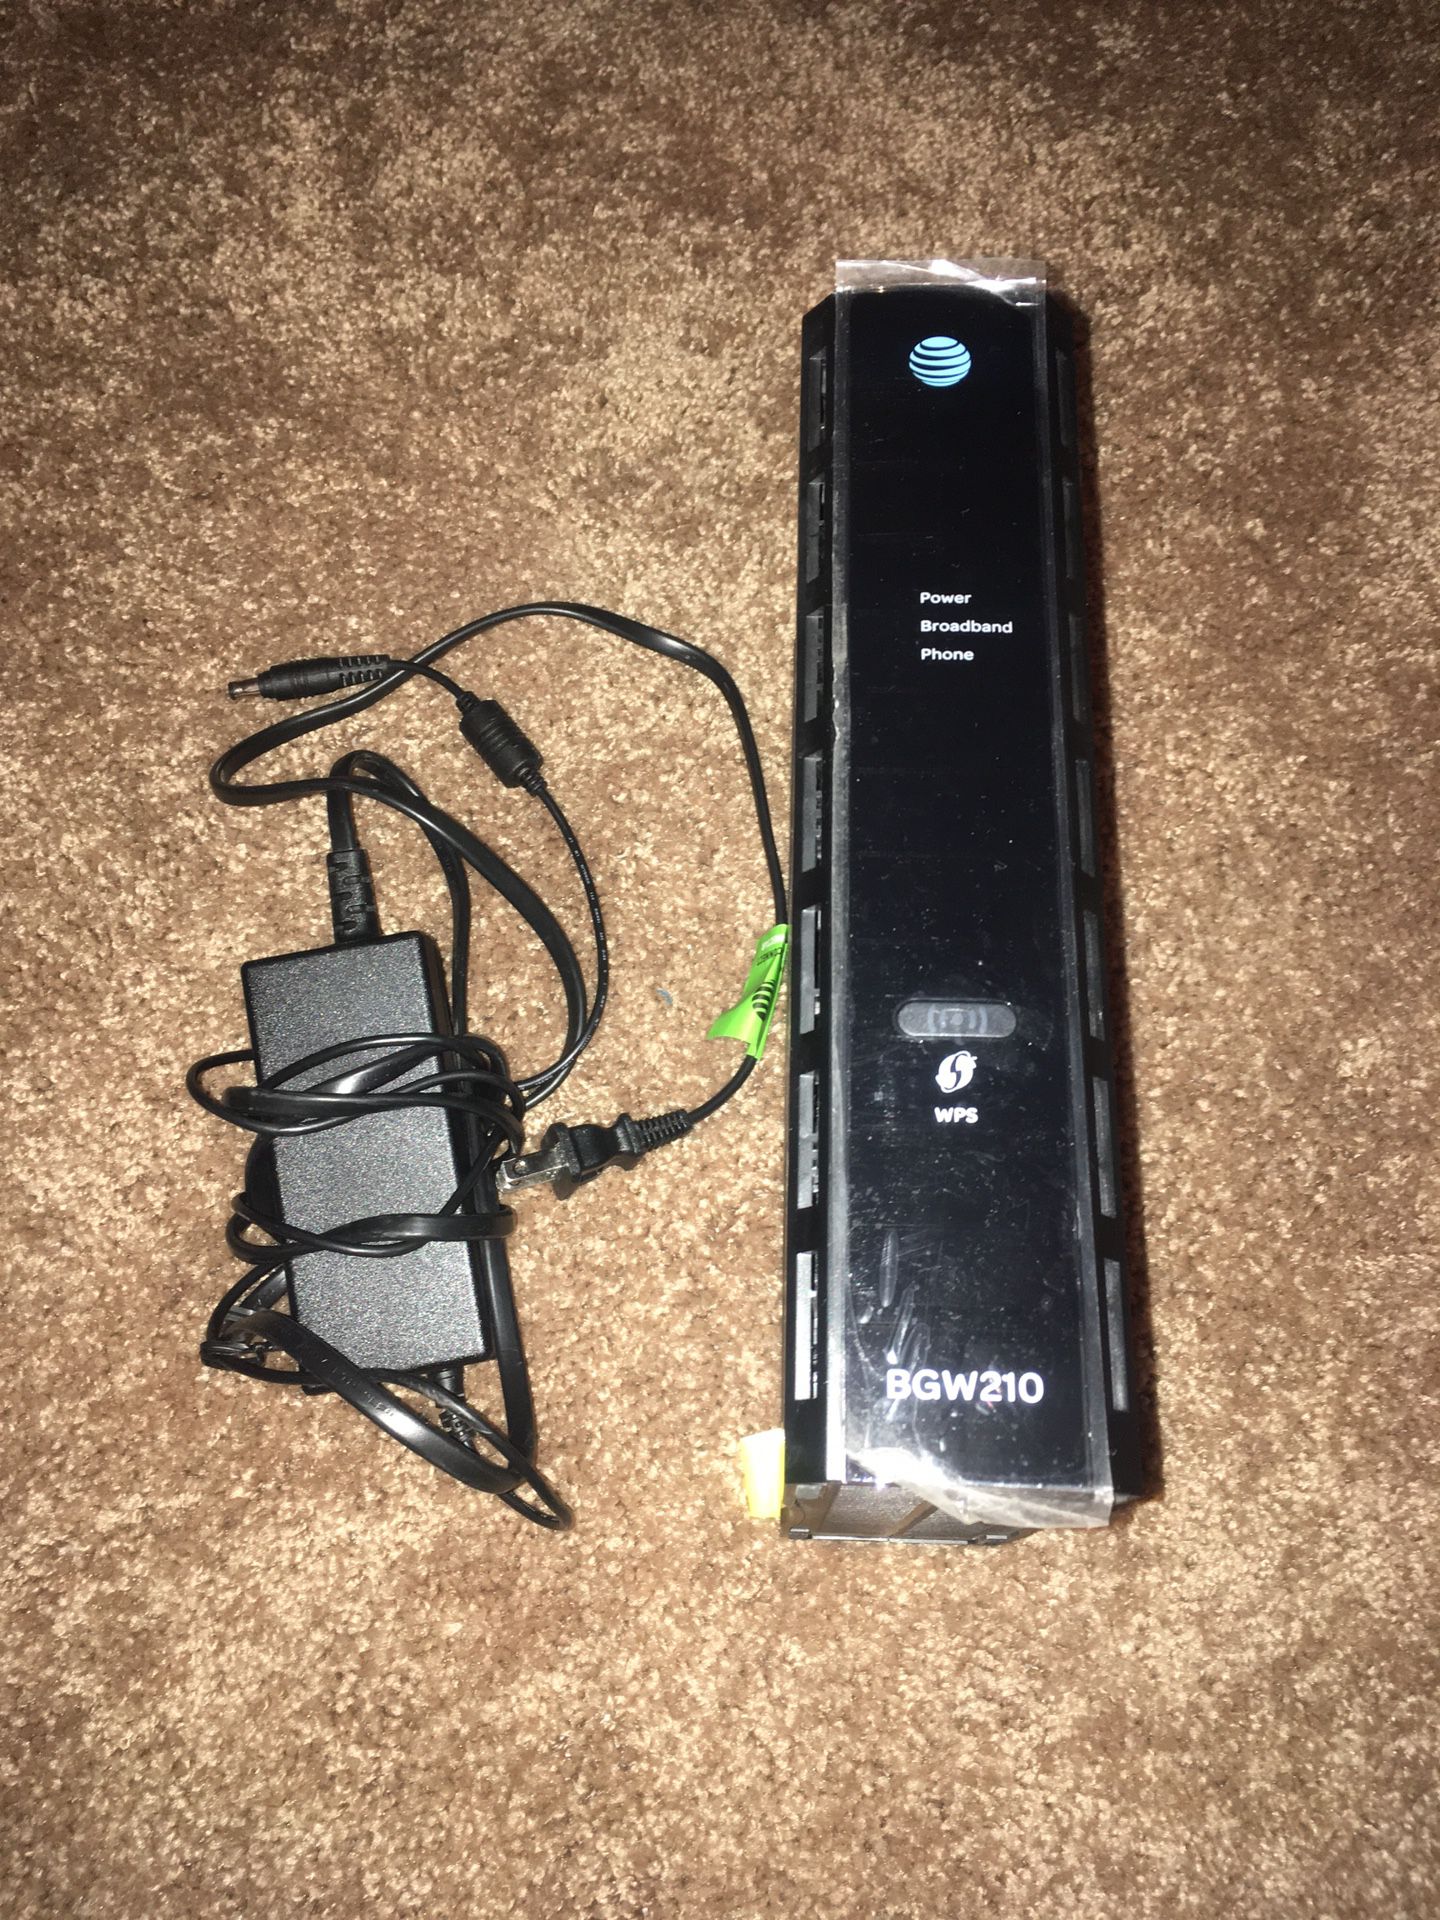 Arris BGW210-700 Gateway router / modem Compatible with AT&T